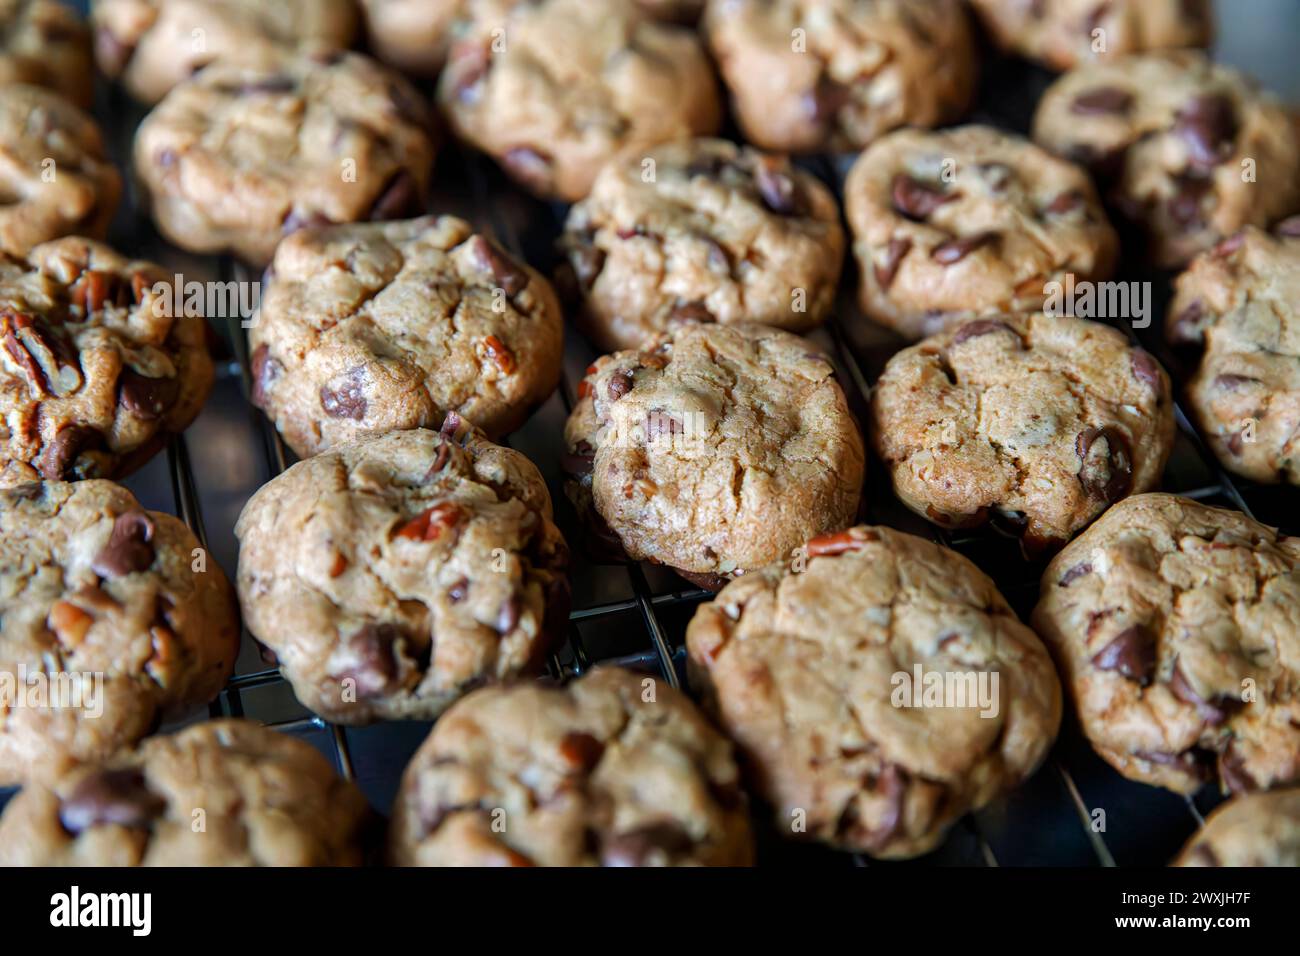 Freshly baked chocolate chip cookies, cooling on rack. Stock Photo